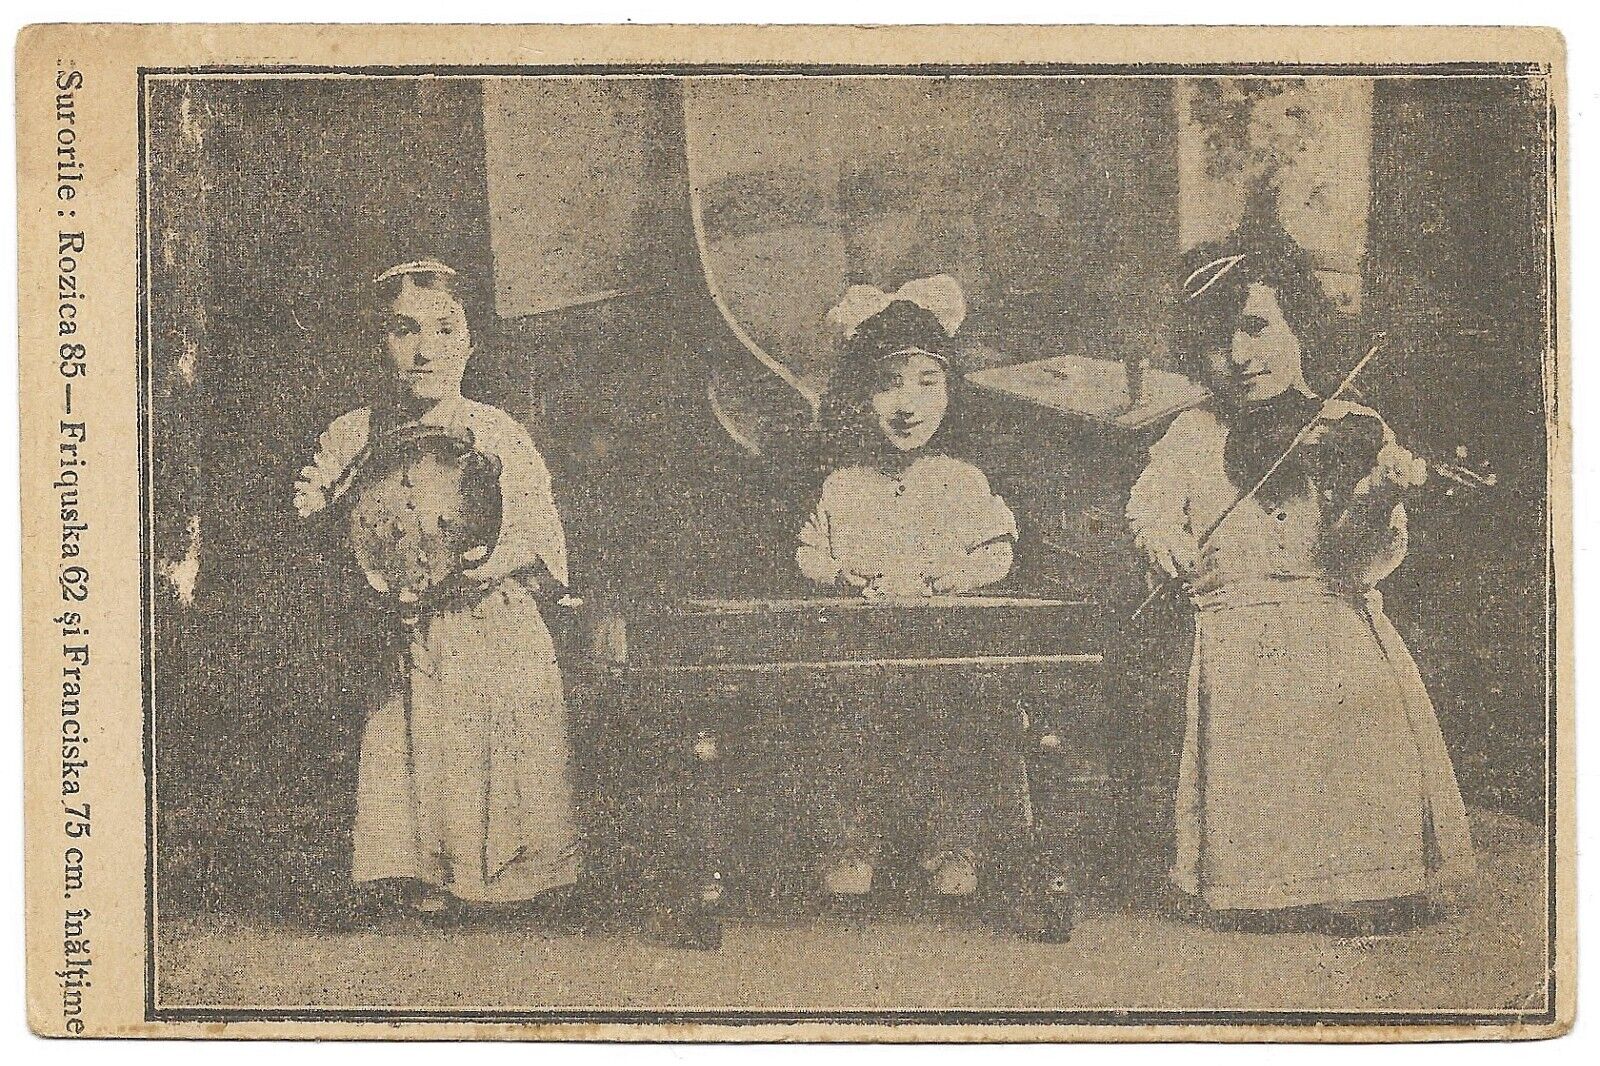 EXTREMELY RARE ROMANIA DWARF Midget SISTERS TROOPS Circus ANTIQUE 1900 PHOTO